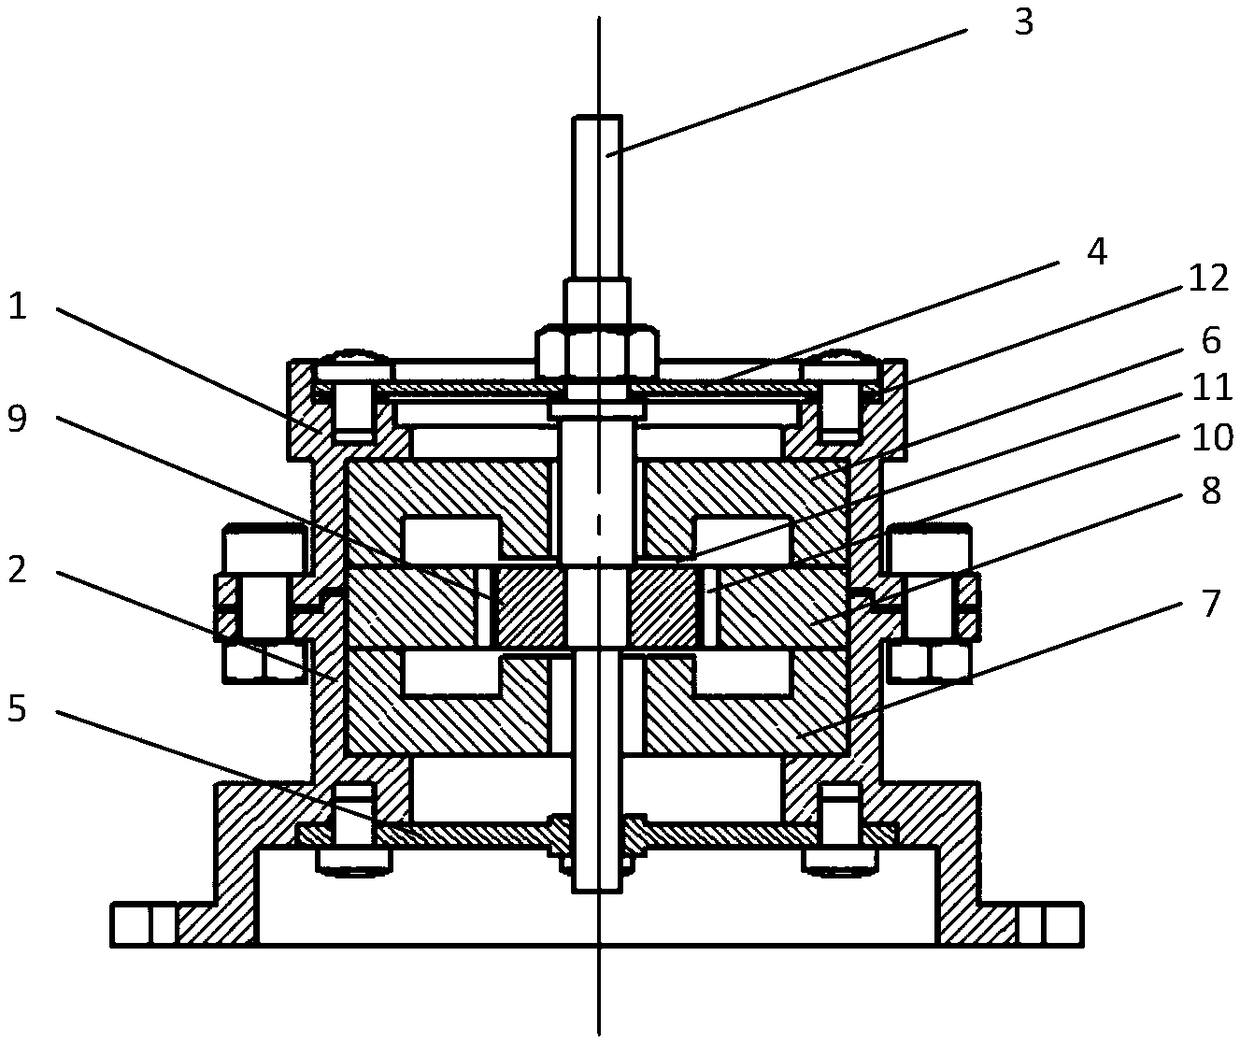 Quasi-zero stiffness vibration isolator with positive and negative stiffness in parallel connection